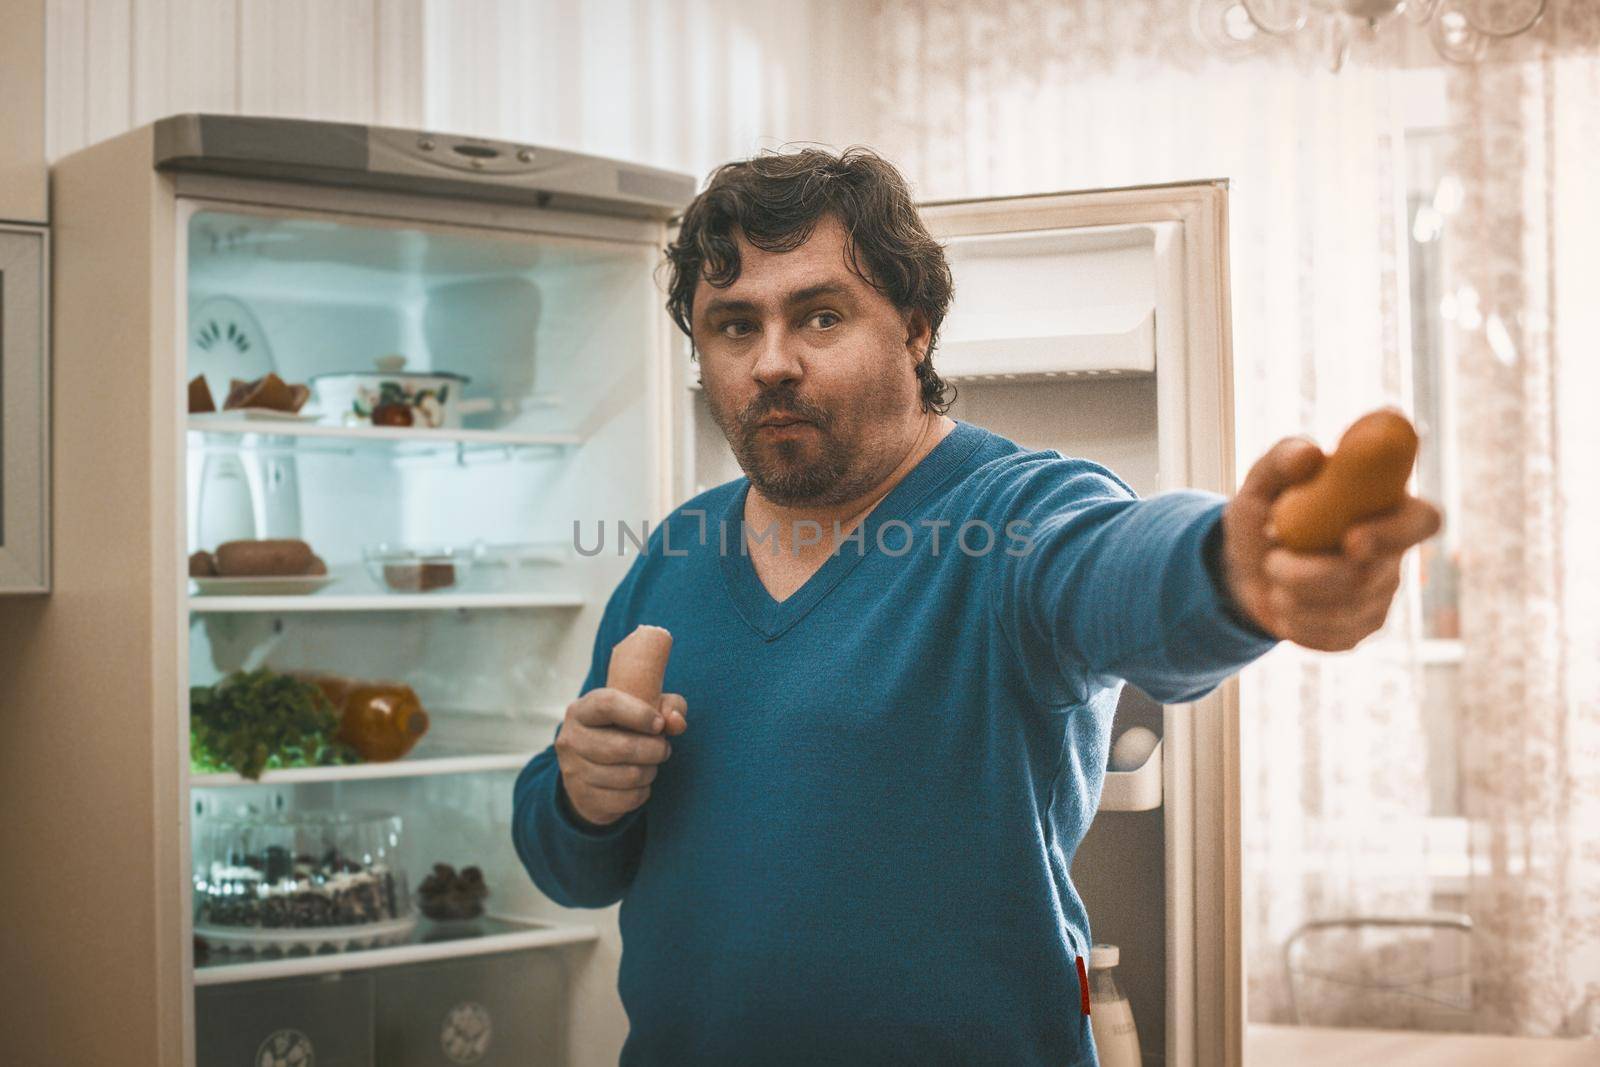 Plus Size Man Holds Out Sausage Into Camera, Selective Focused On Face Of Big Caucasian Man Eating And Holding Sausages In Hands While Standing Near Open Refrigerator At Home Kitchen Interior